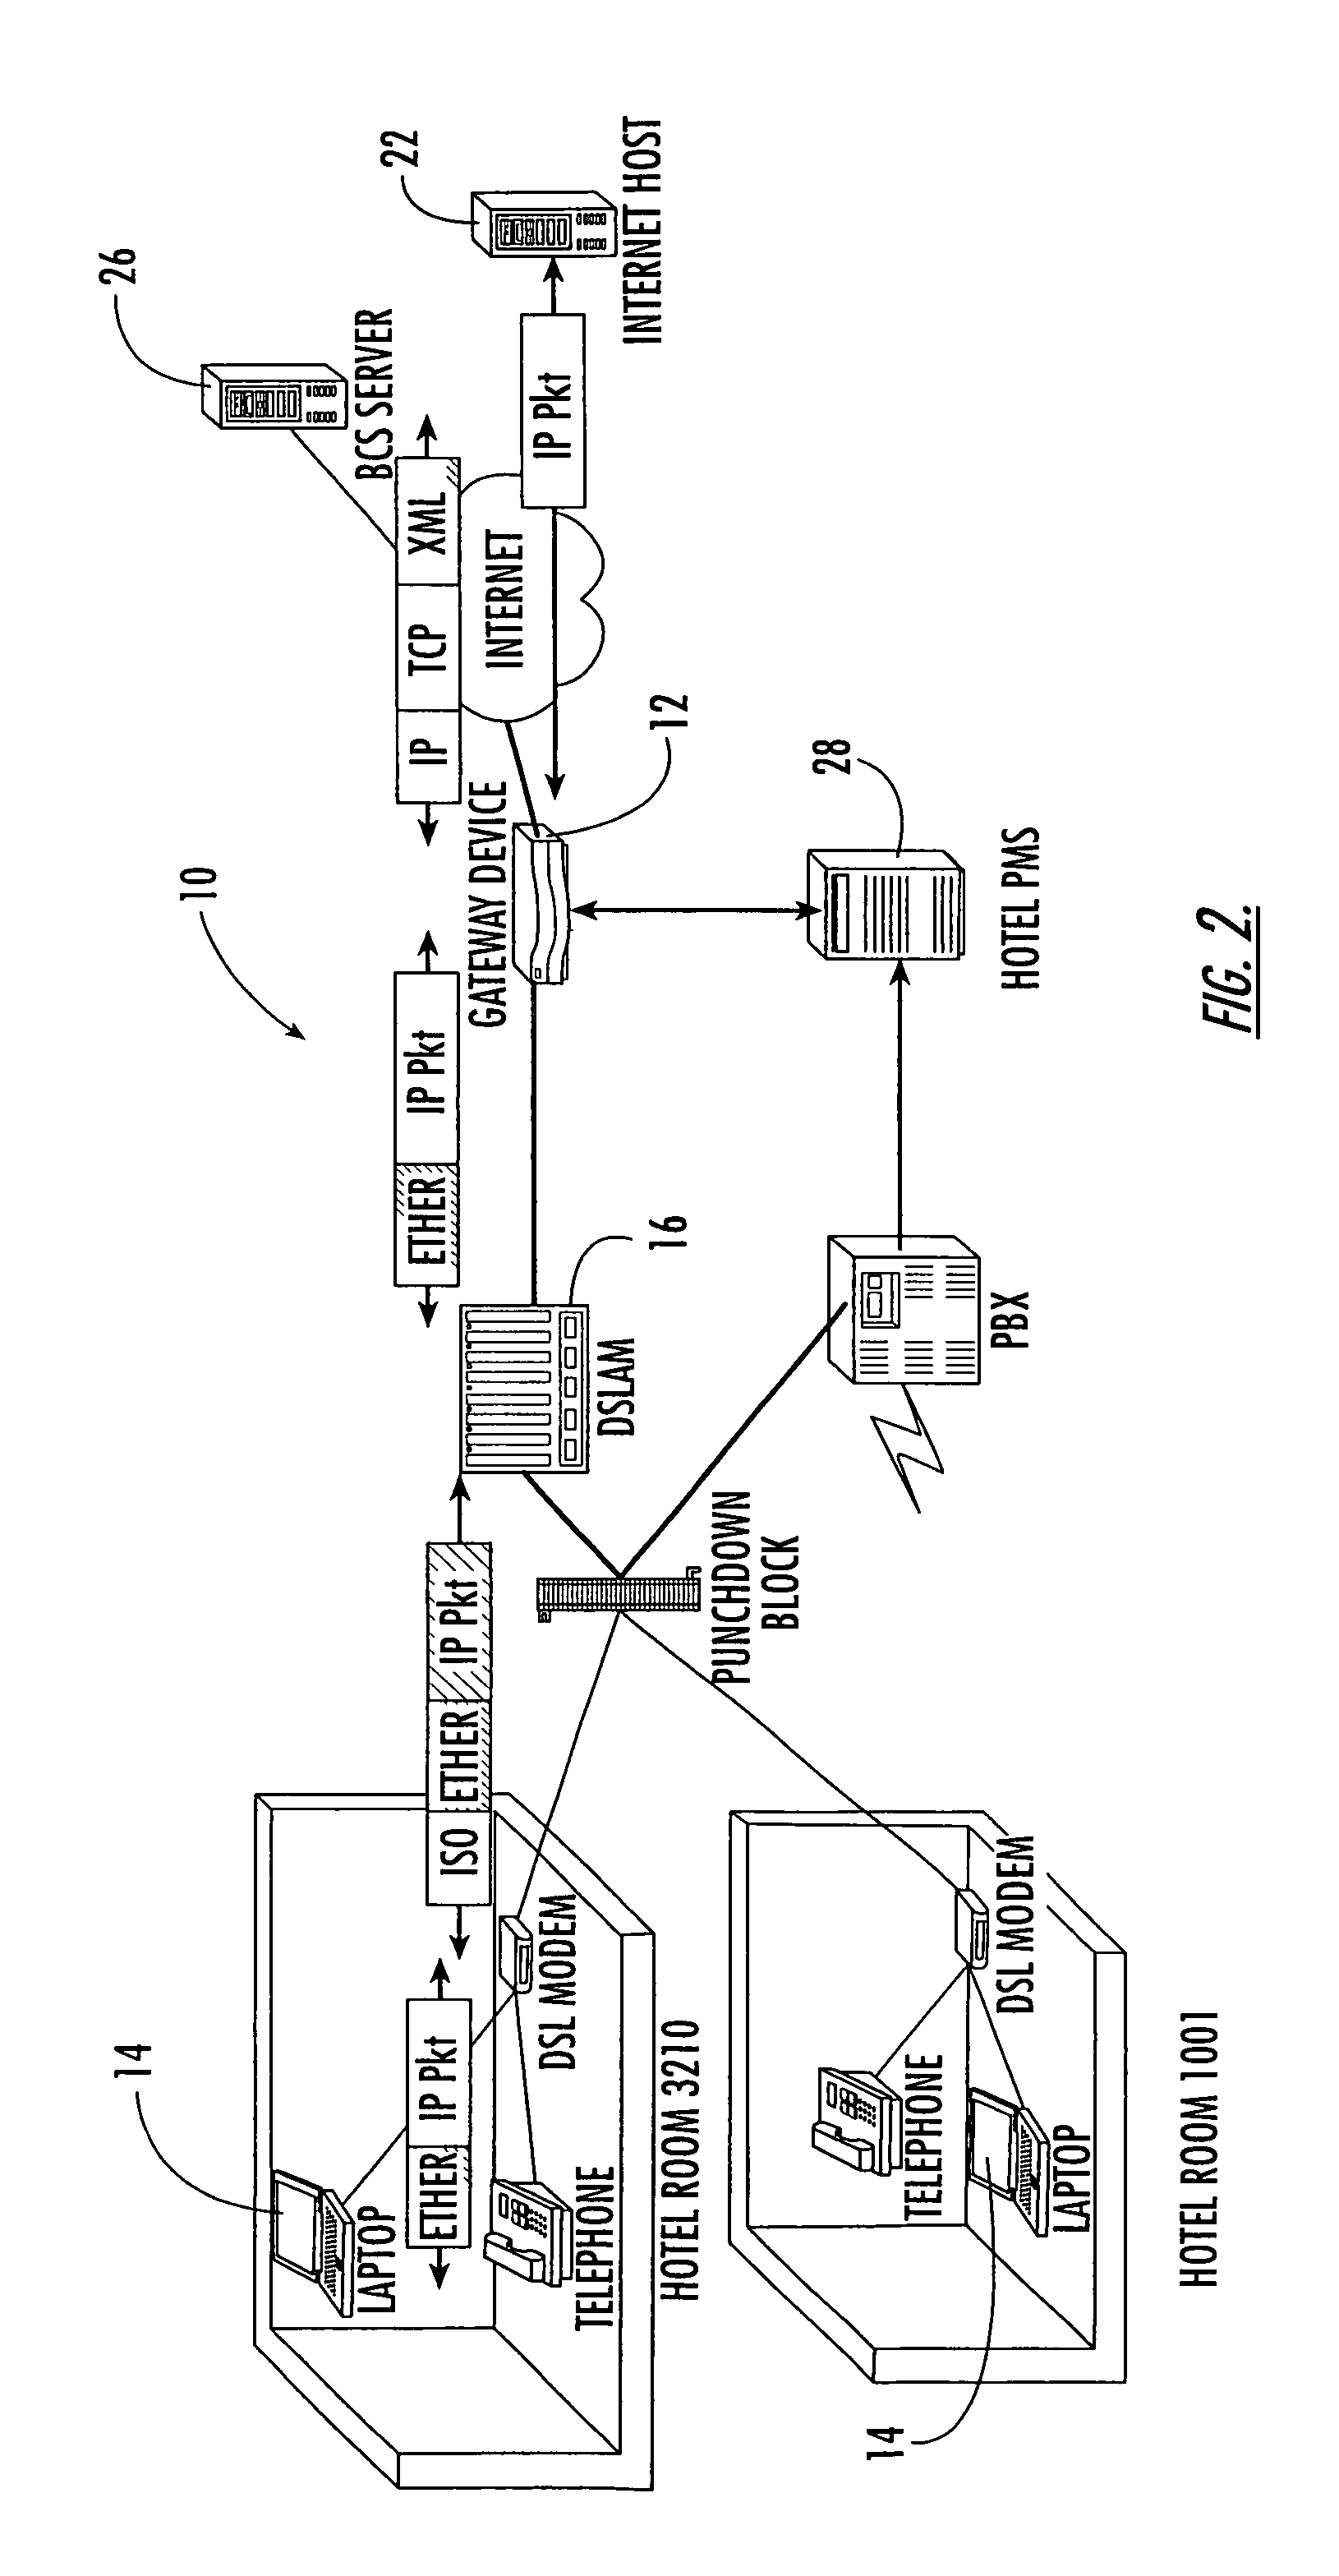 Gateway device having an XML interface and associated method